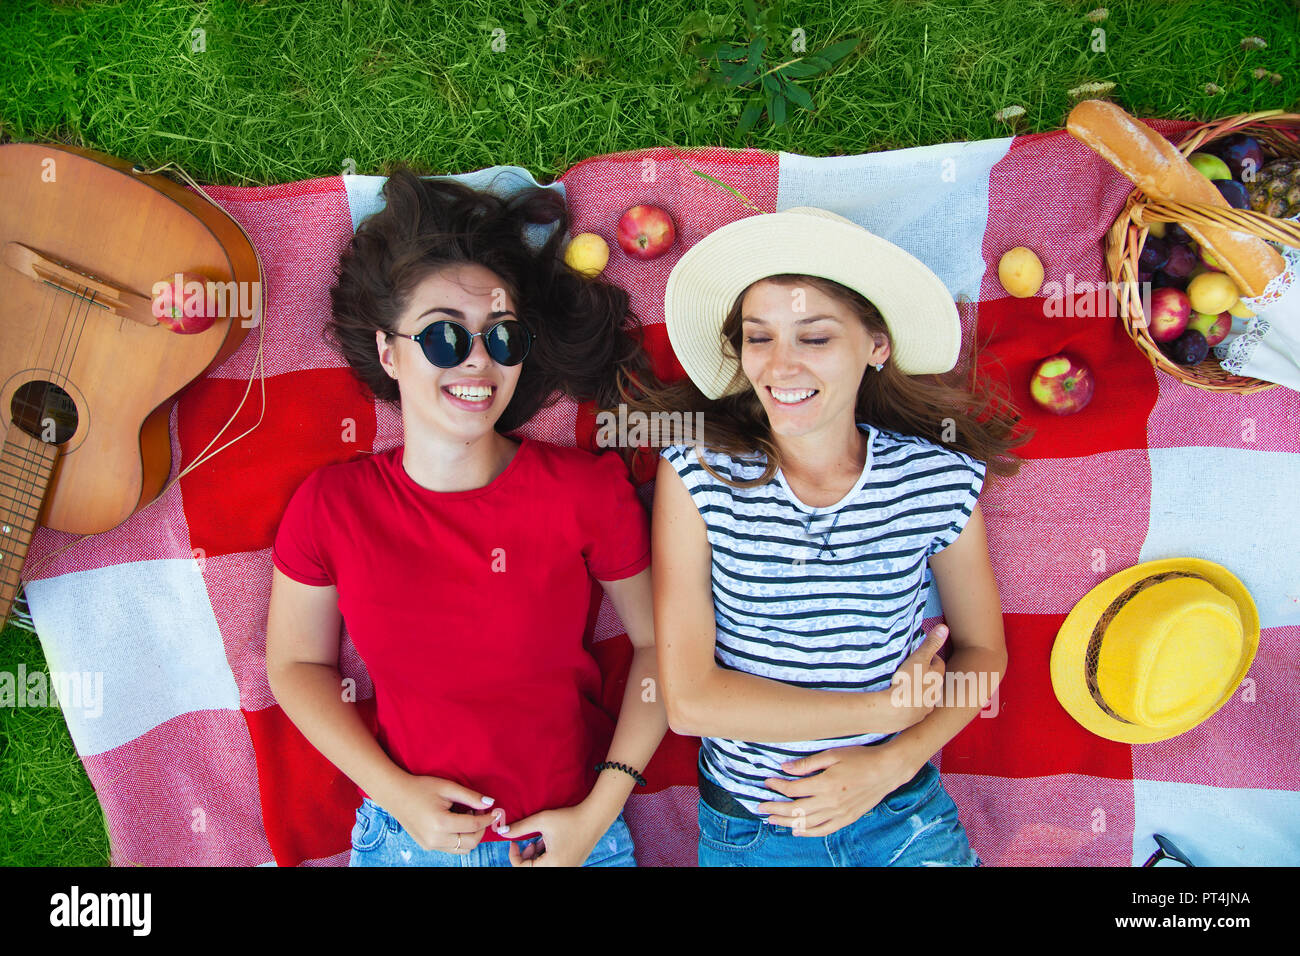 Two Beautiful Girls In Sunglasses Having Fun On A Picnic In The Forest